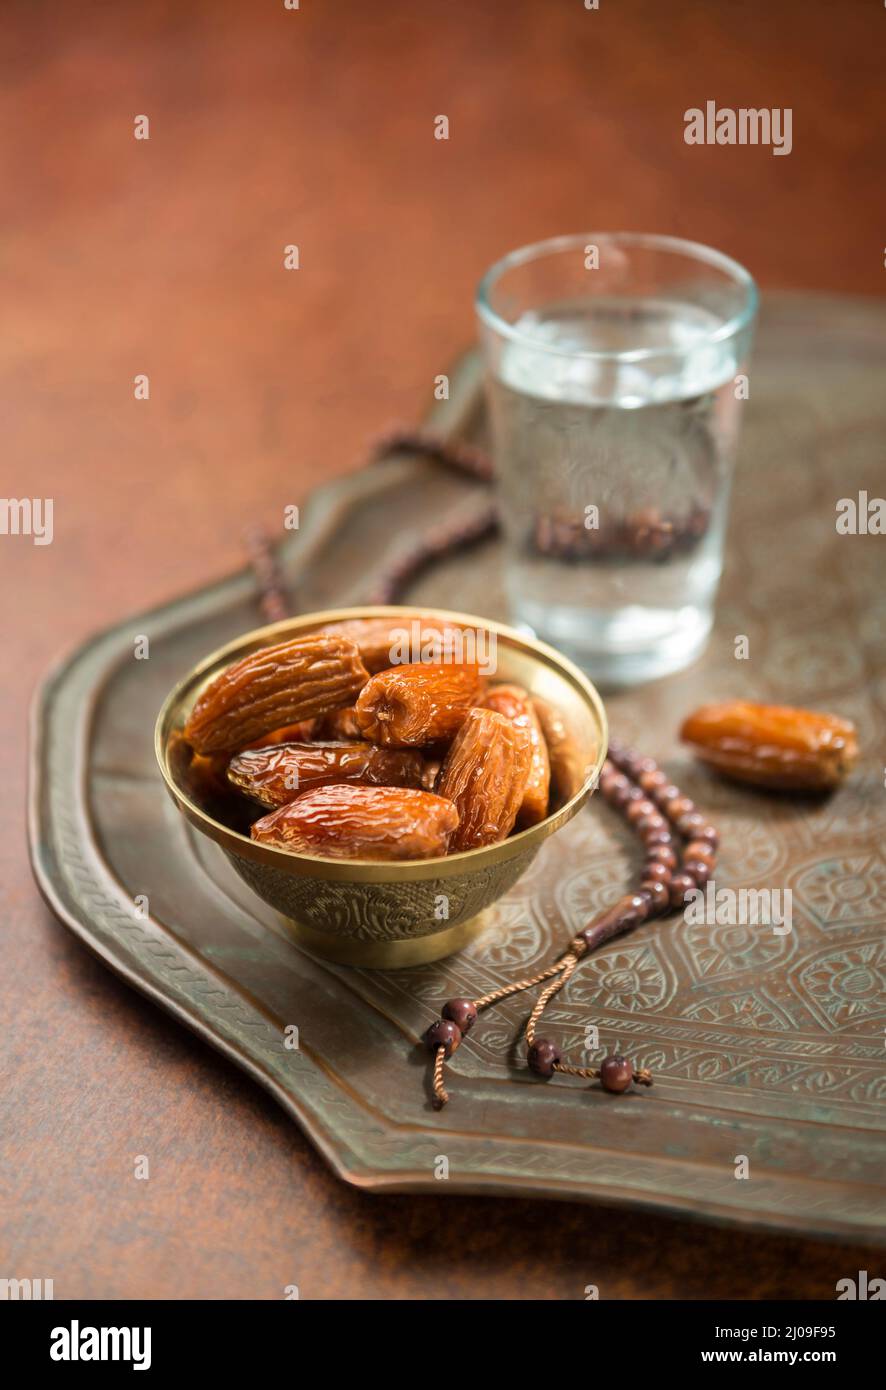 Dates with drinking water - breaking iftar fast during holy month of Ramadan. Dates are sacred fruit which is consume during holy month of Ramadan. Stock Photo